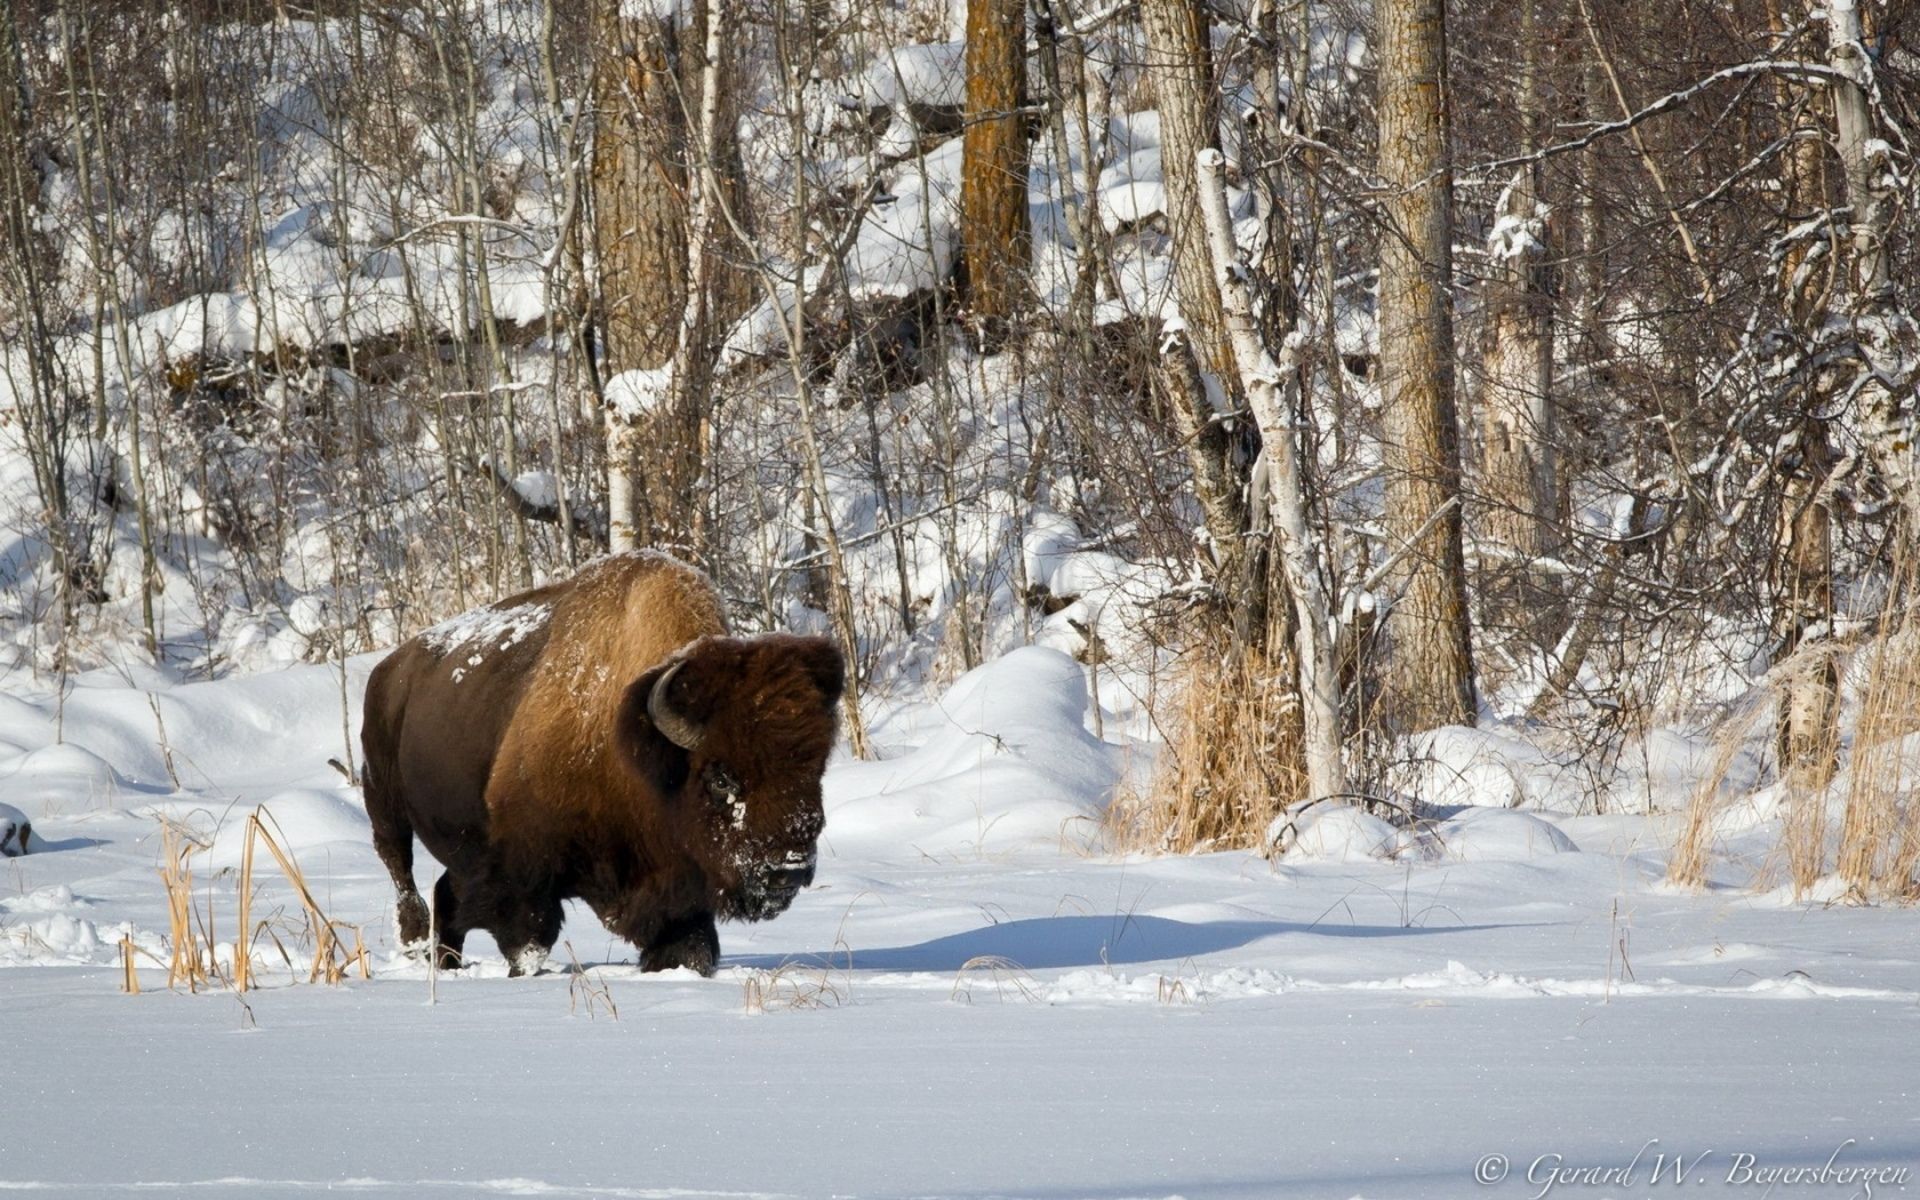 Bison buffalo landscapes winter snow animals wildlife tees forest wallpaperx1200